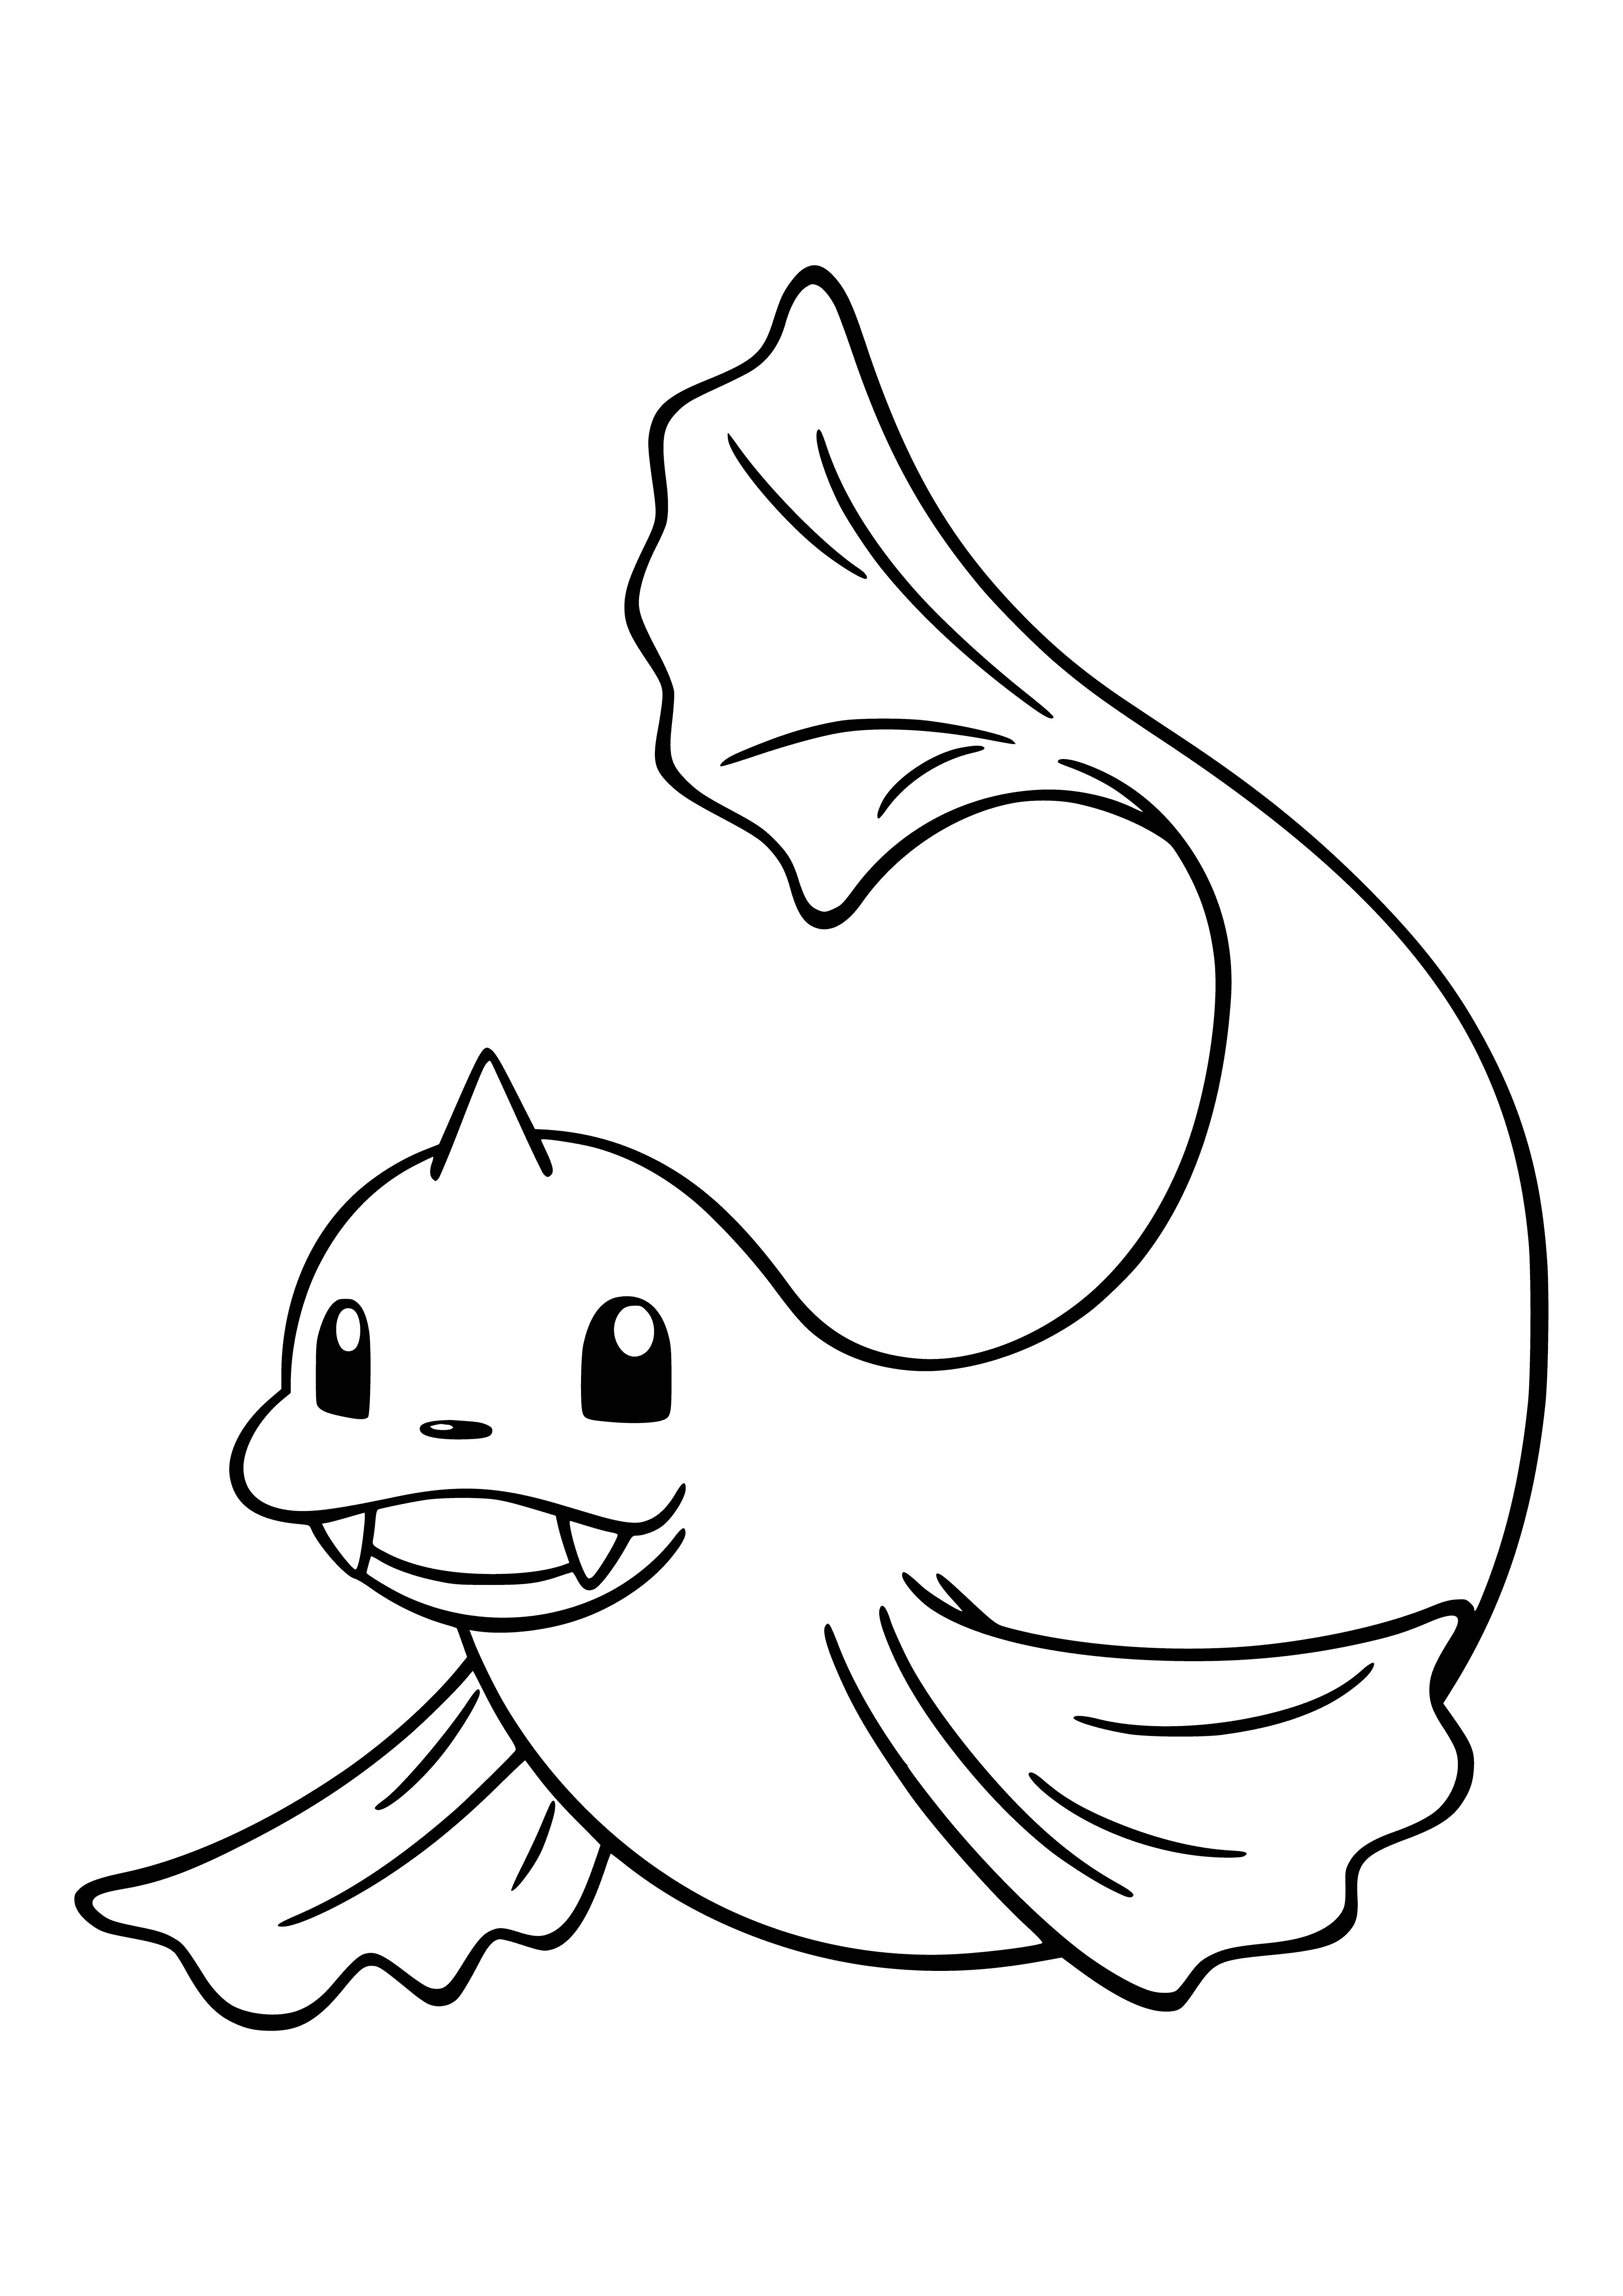 Pokemon Duwgong coloring page